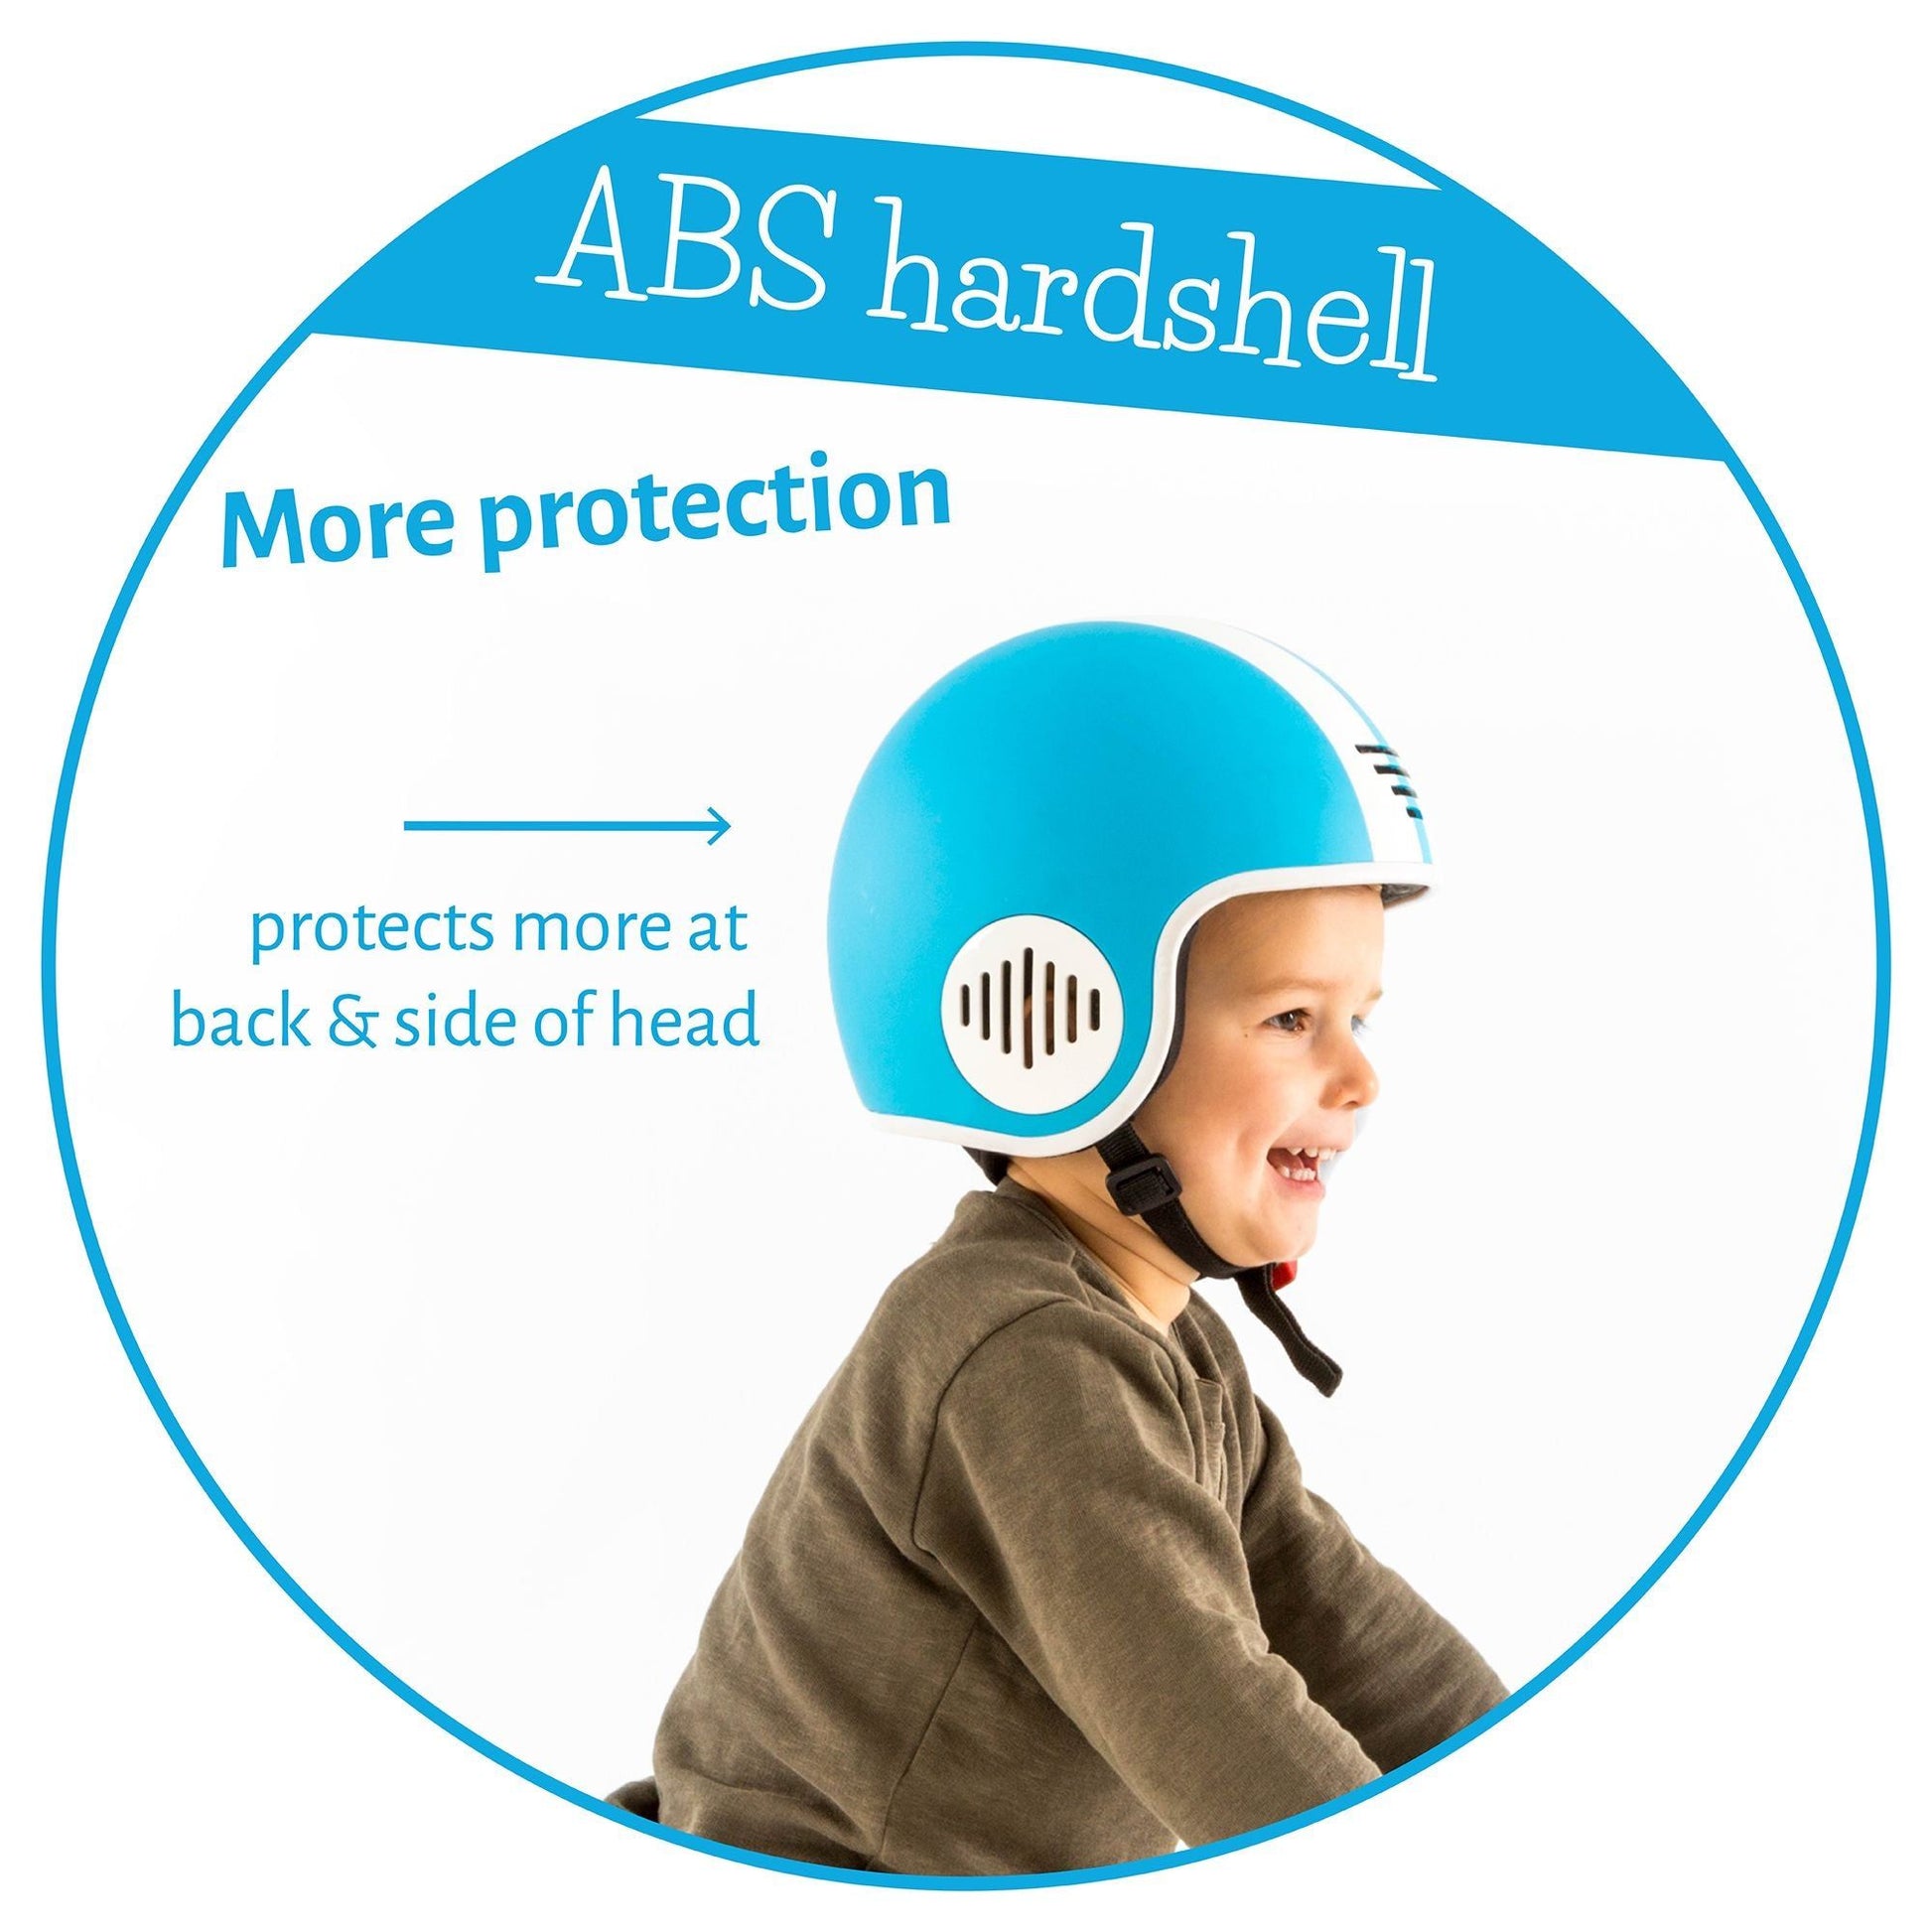 Chillafish Kids Helmet Bobbi XS Blue with ABS hardshell for more protection